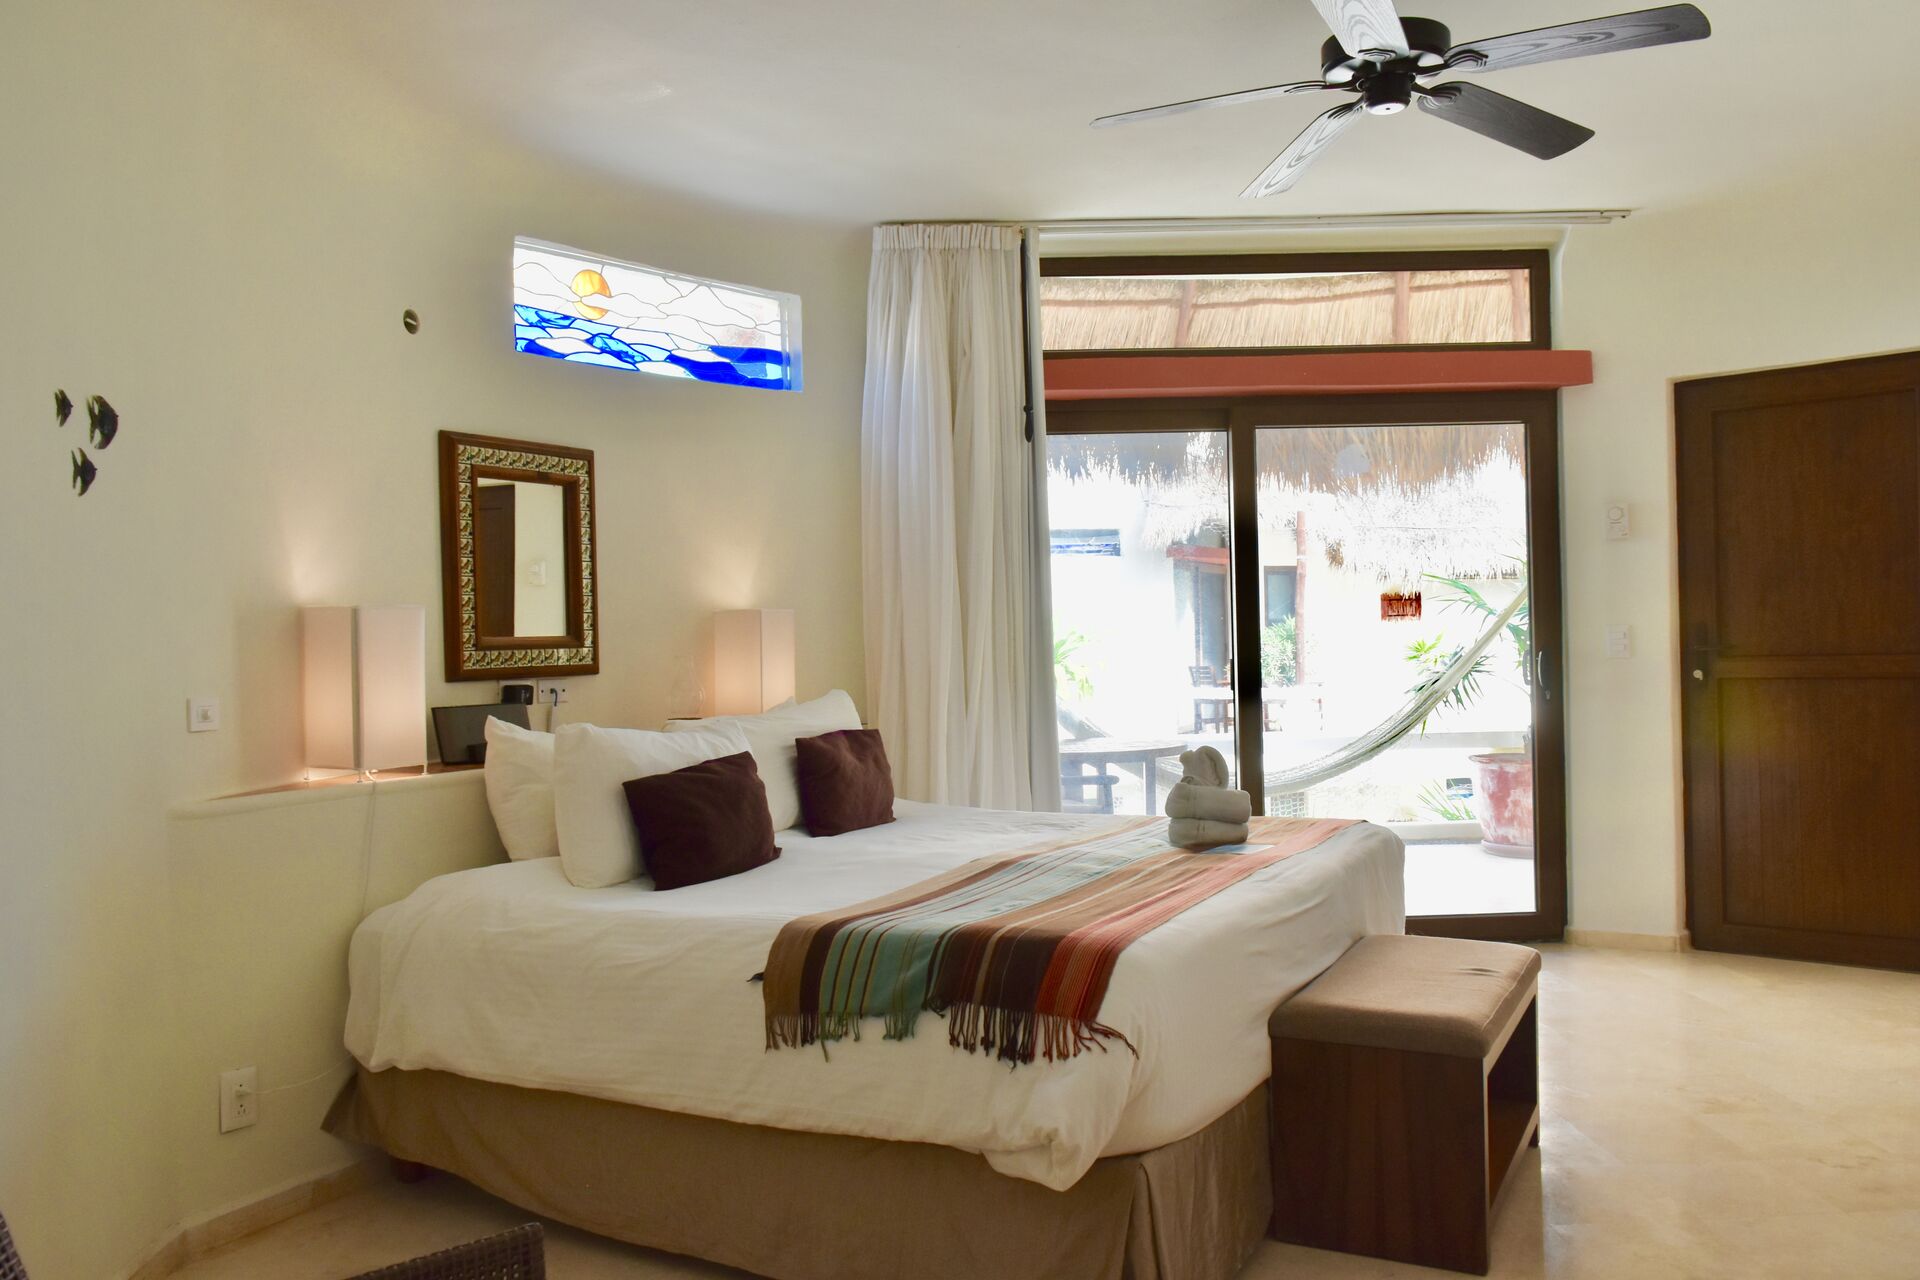 Fully furnished ocean view suite with king size bed and kitchenette.